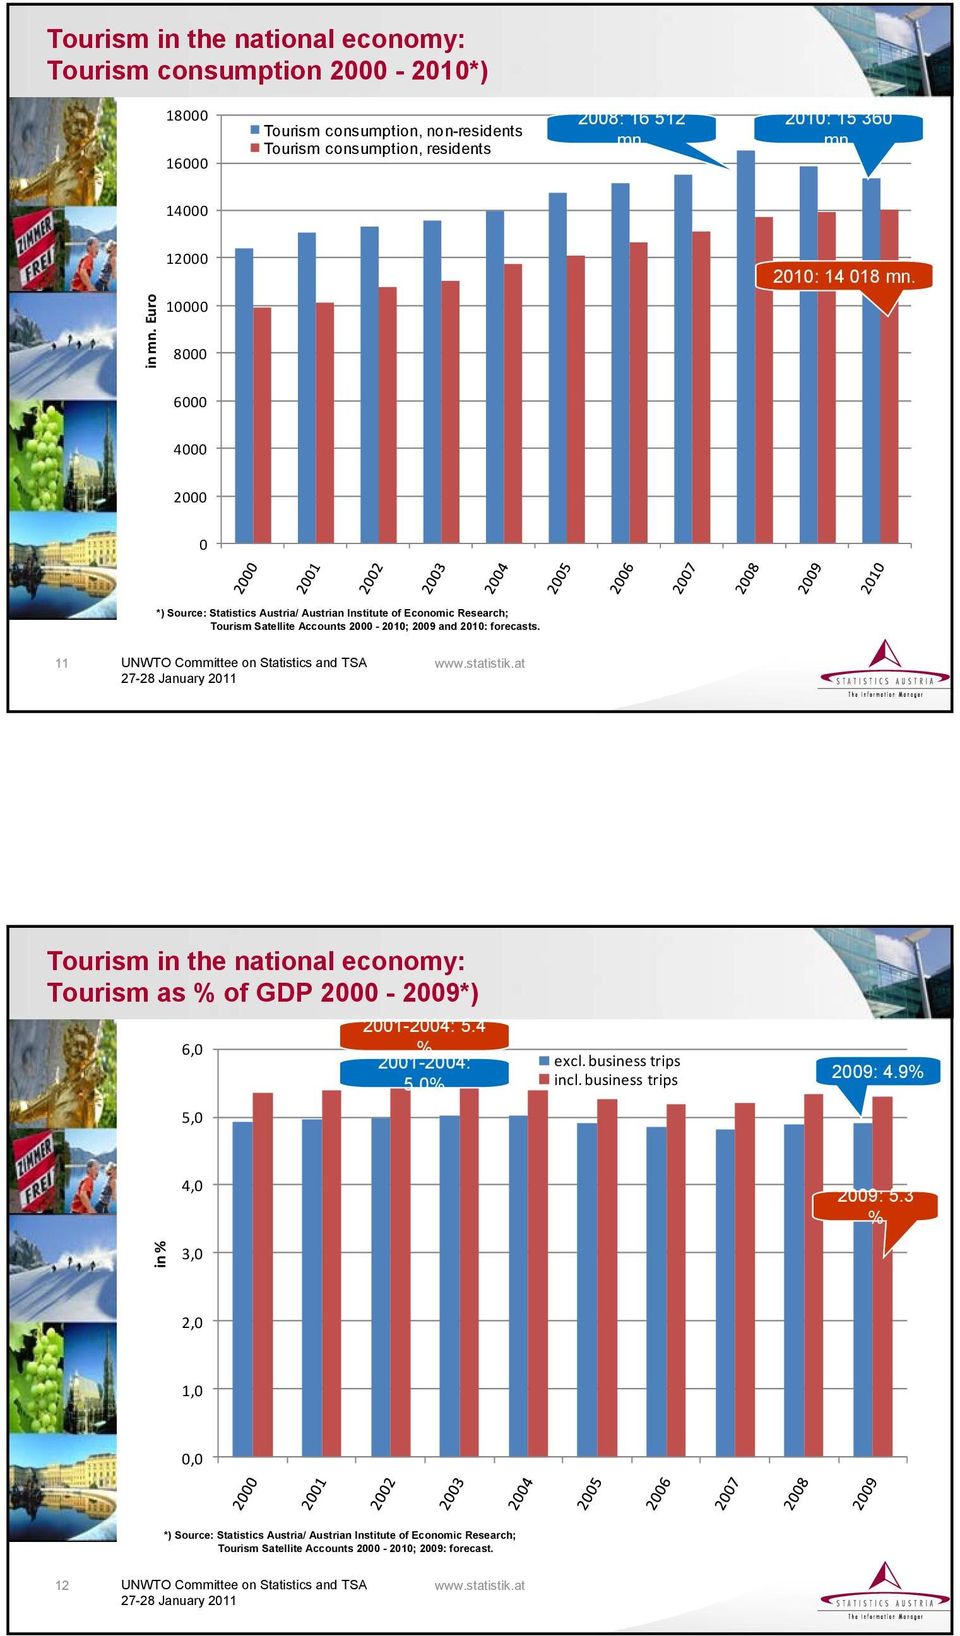 11 UNWTO Committee on Statistics and TSA Tourism in the national economy: Tourism as % of GDP 00-09*) 6,0 5,0 01-04: 5.4 % 01-04: 5.0% excl. business trips incl.